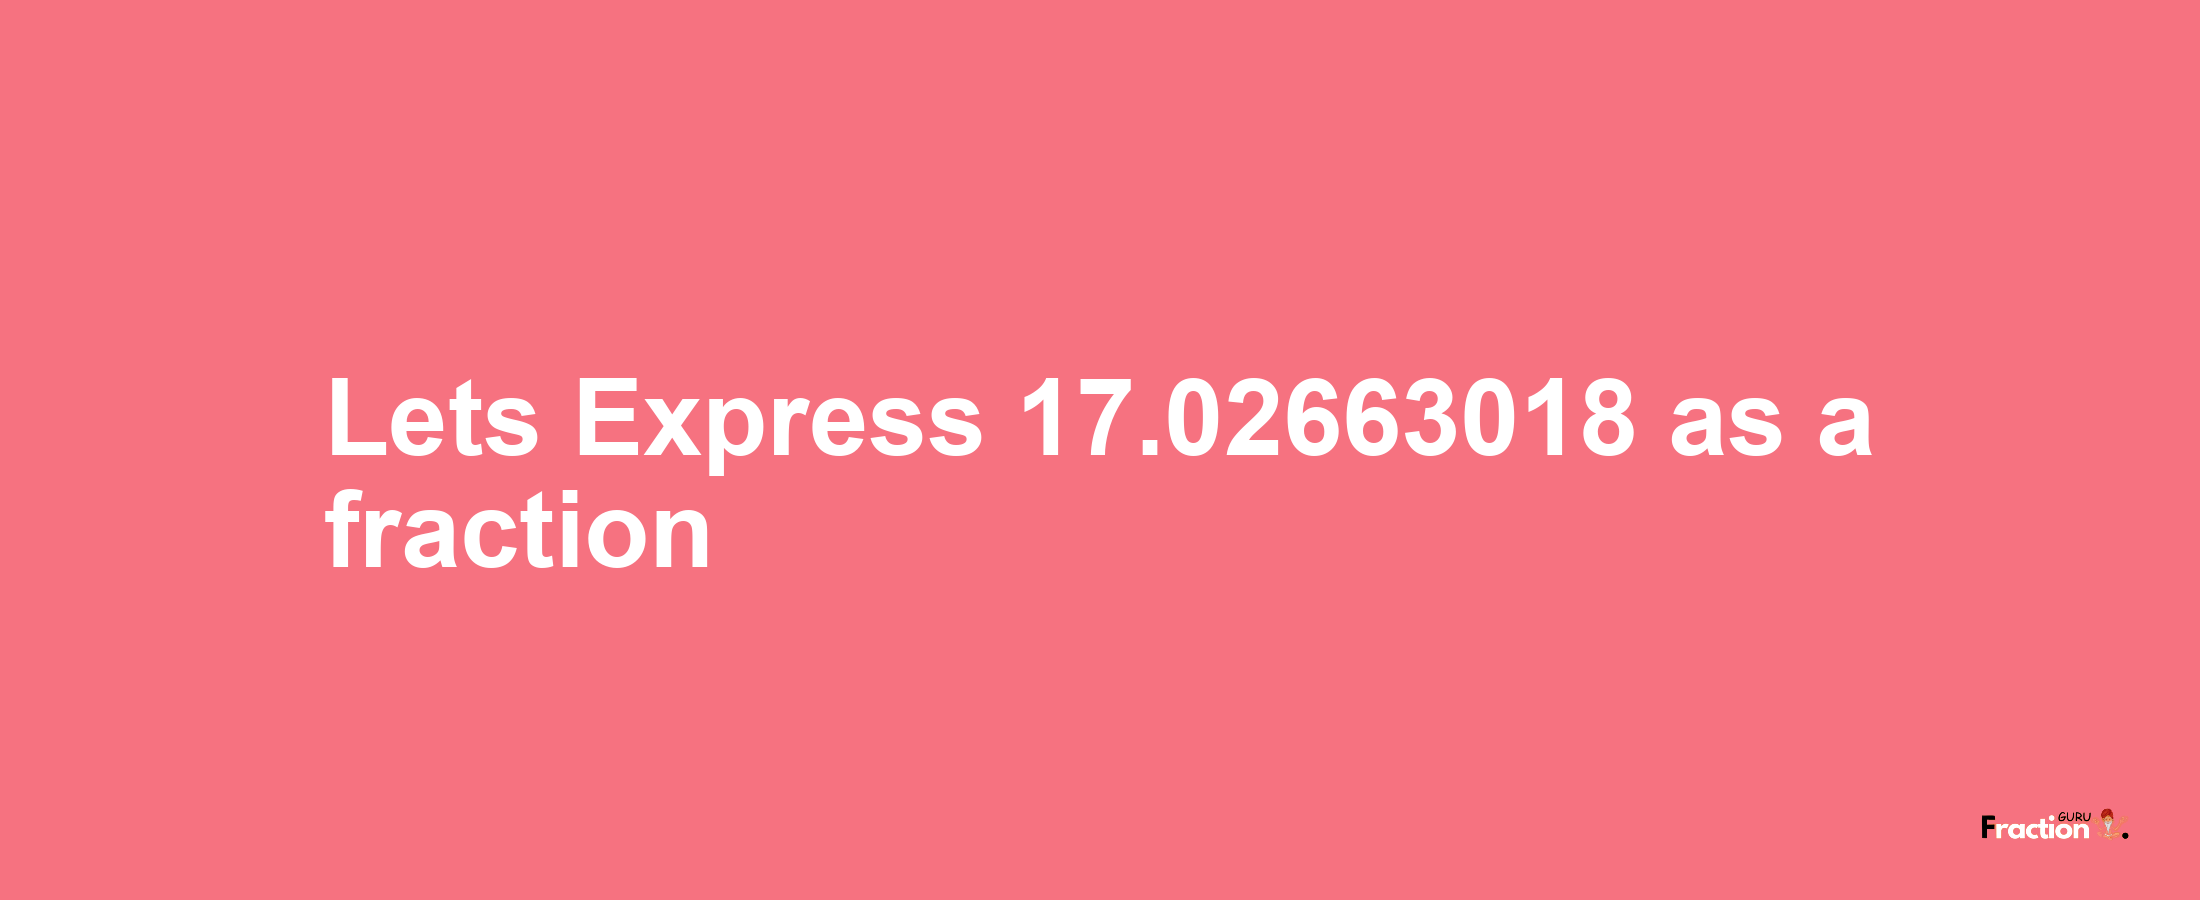 Lets Express 17.02663018 as afraction